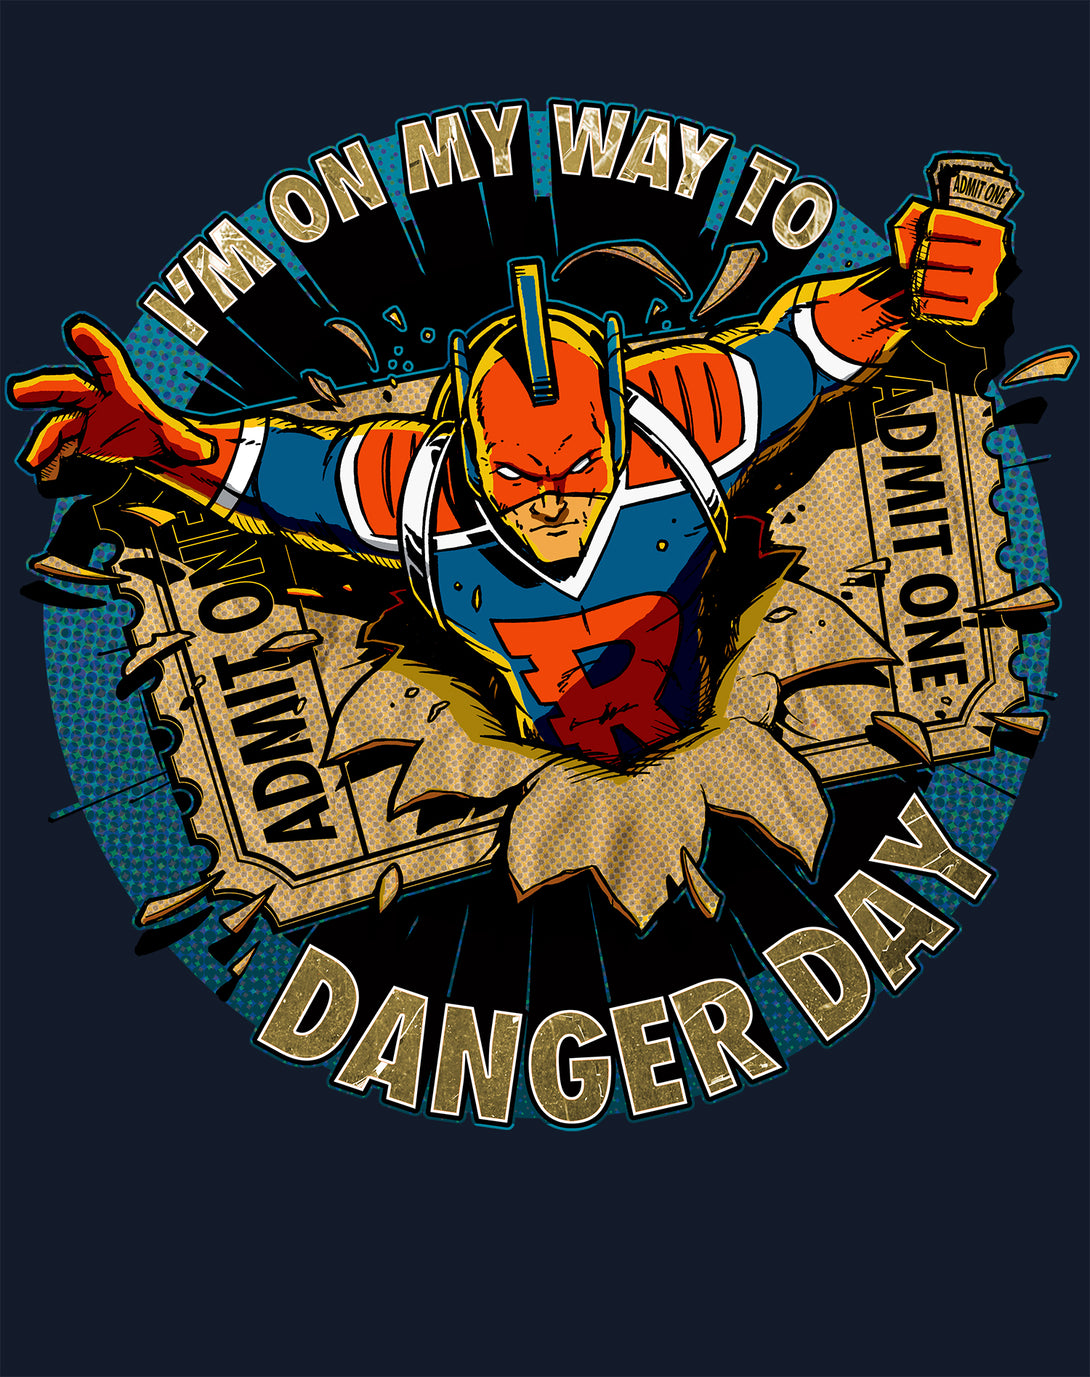 Kevin Smith View Askewniverse Danger Days Logo LDN Edition Official Men's T-Shirt Navy - Urban Species Design Close Up